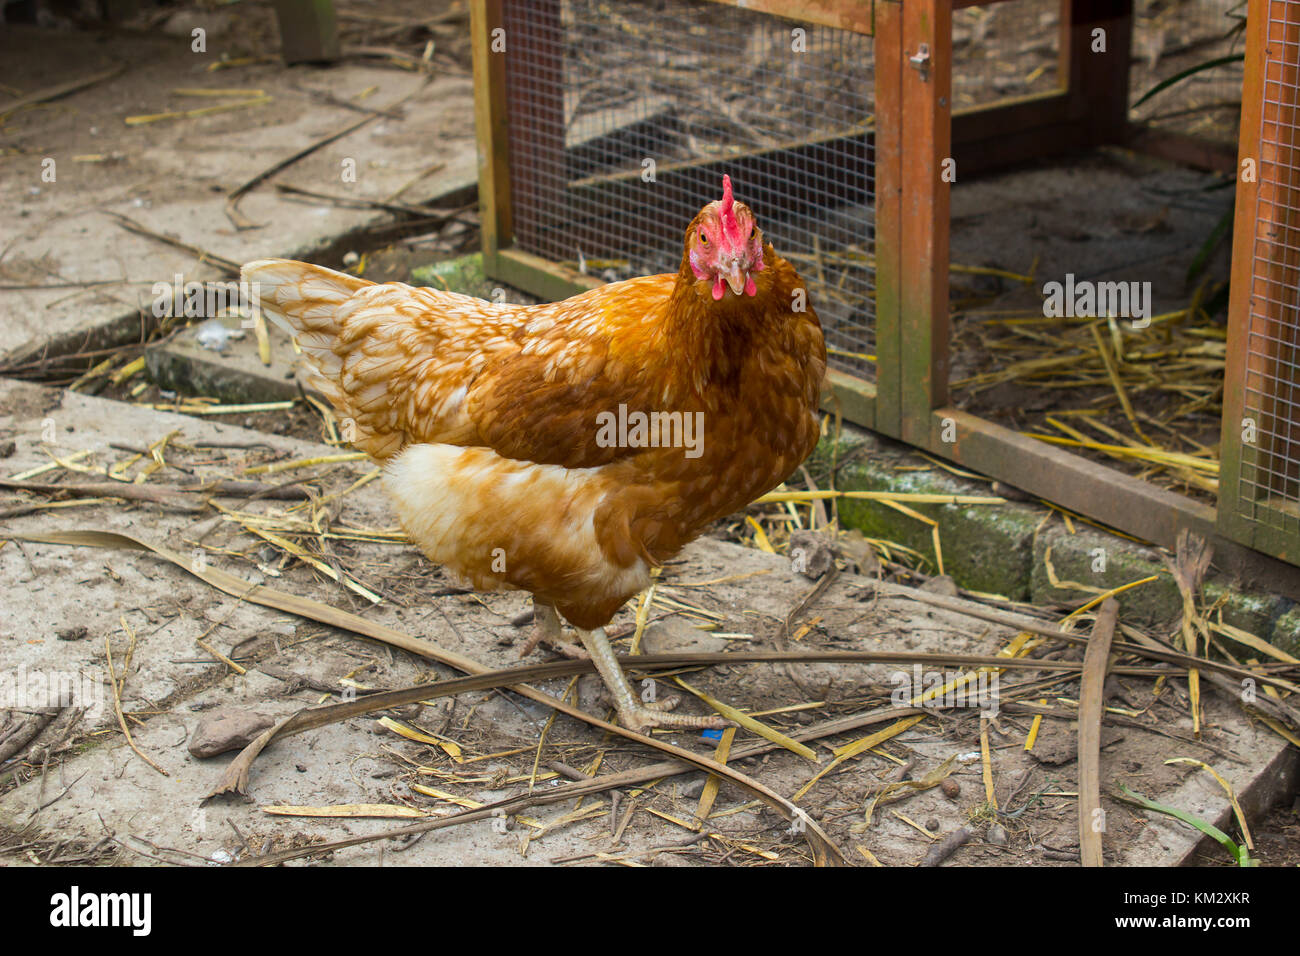 A red hybrid egg laying hen in a domestic back yard and garden Stock Photo